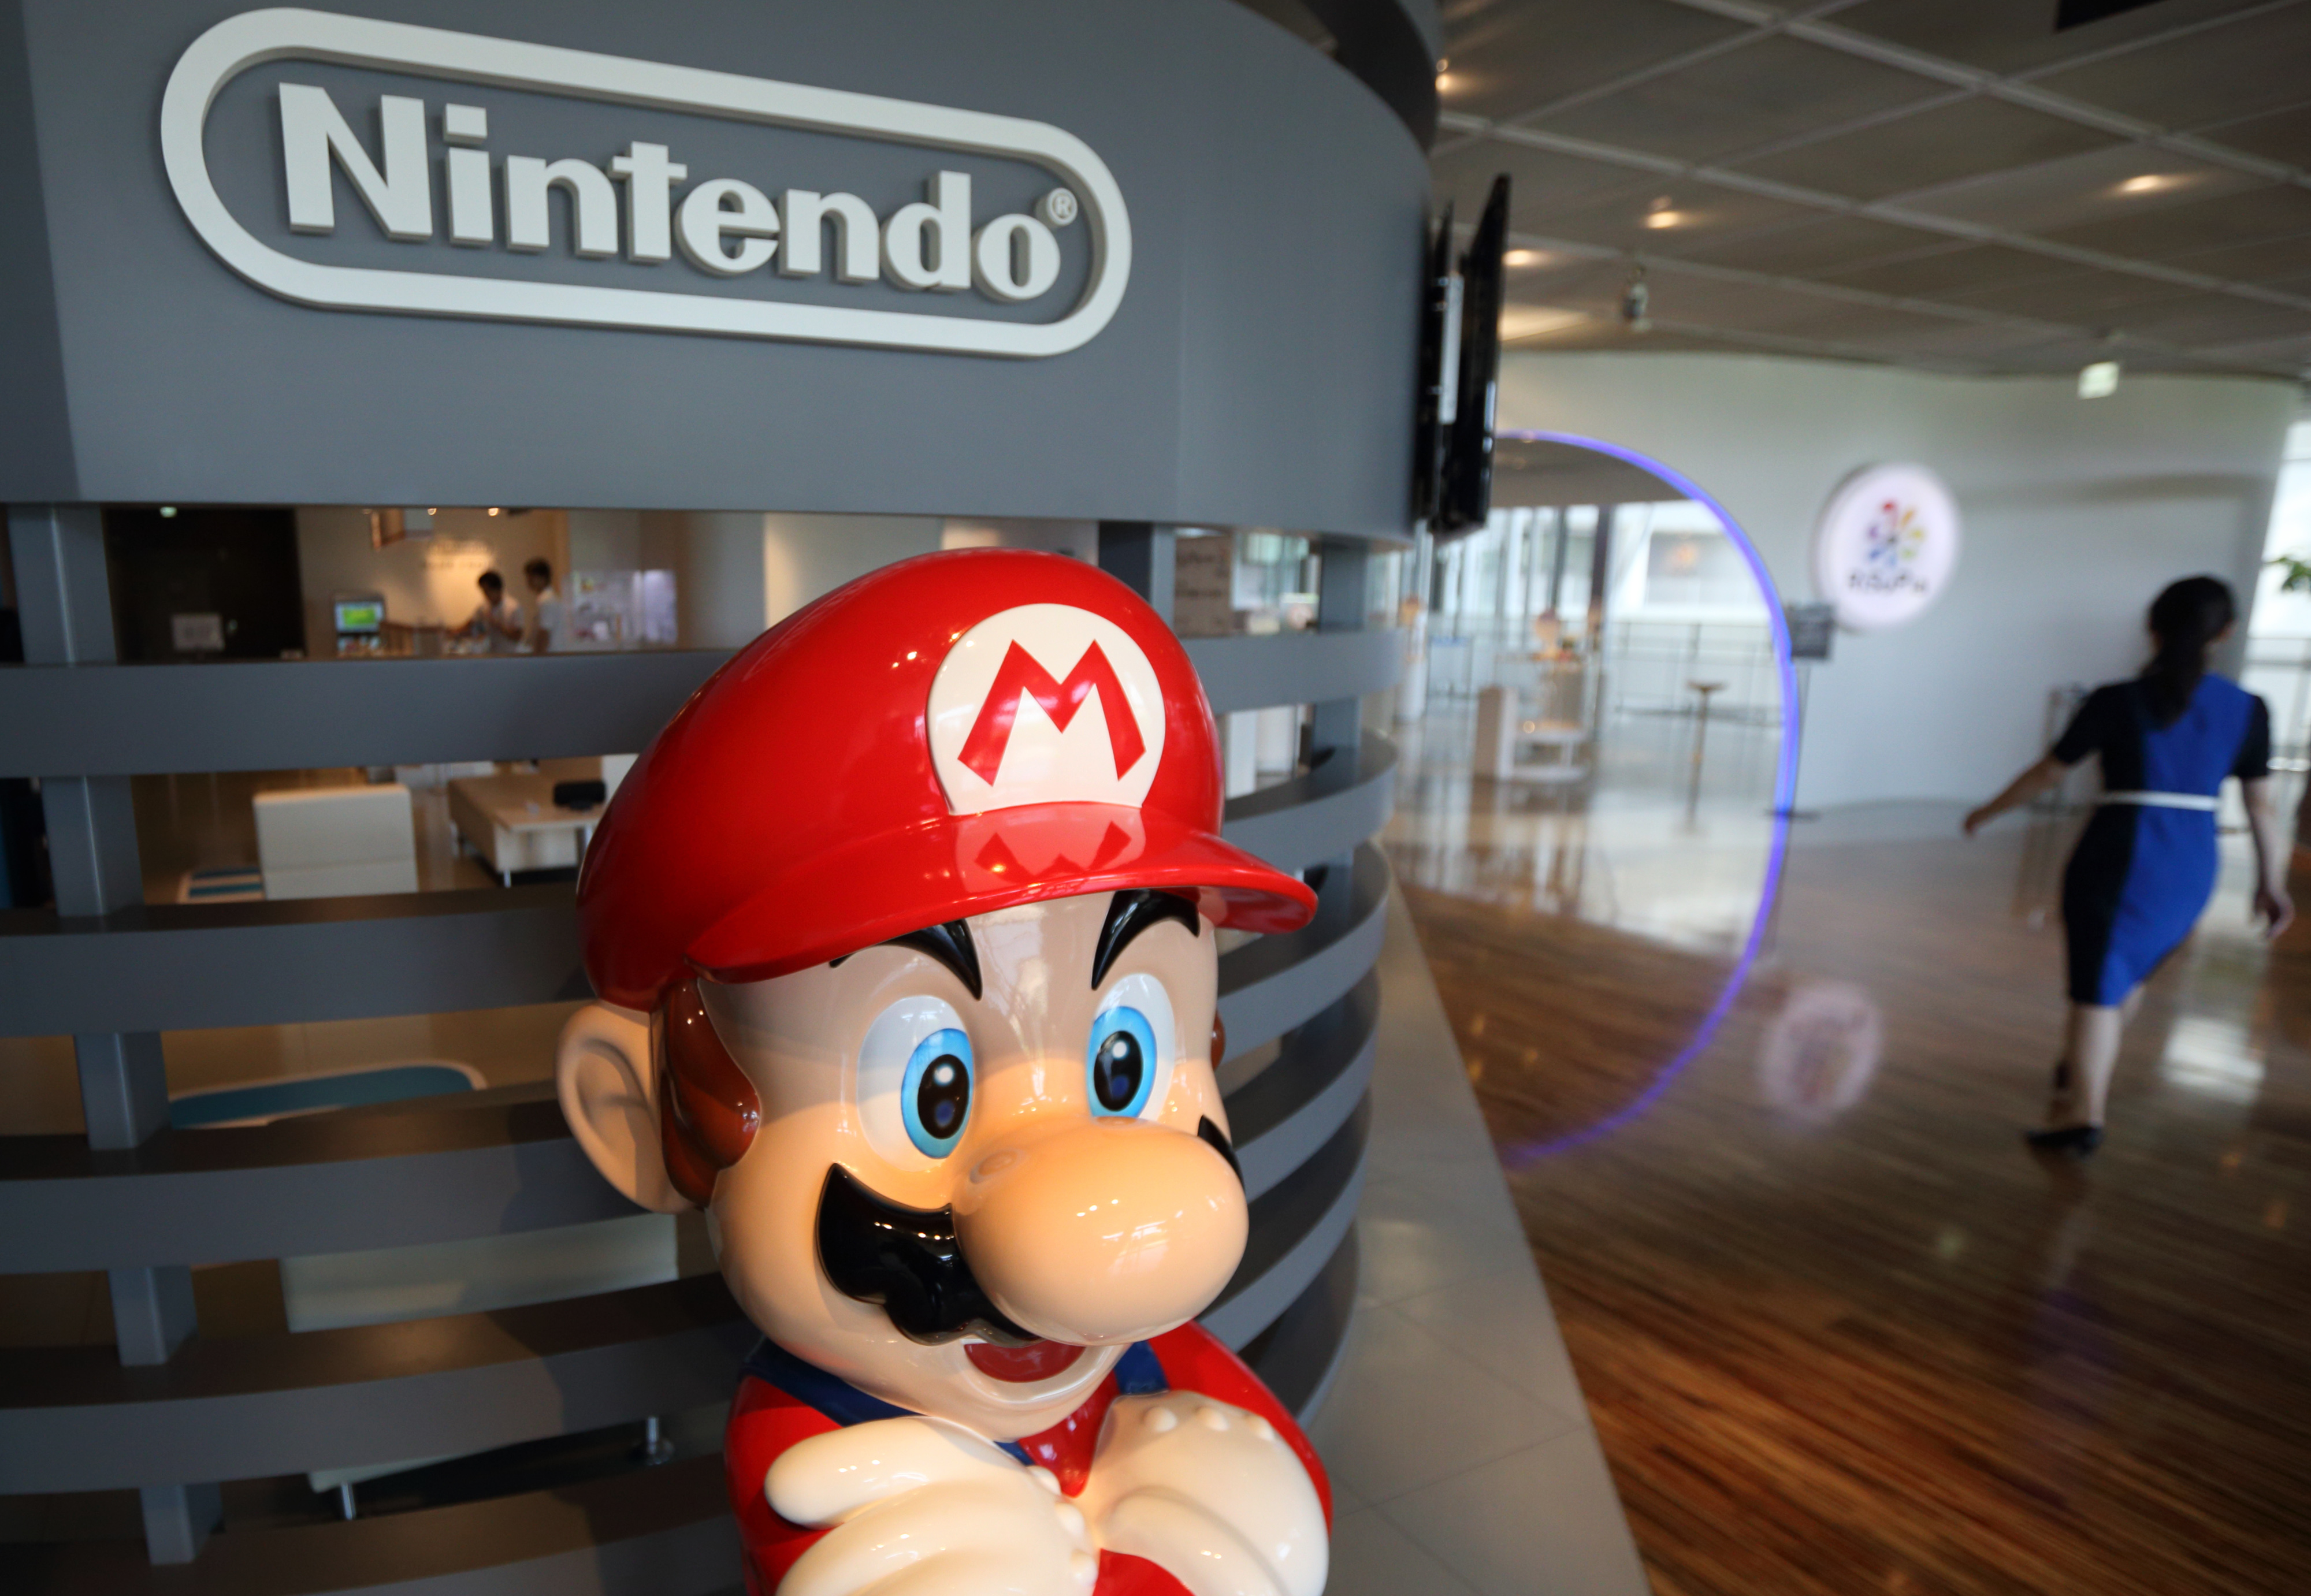 General Nintendo Imagery As The Company Reports Earnings